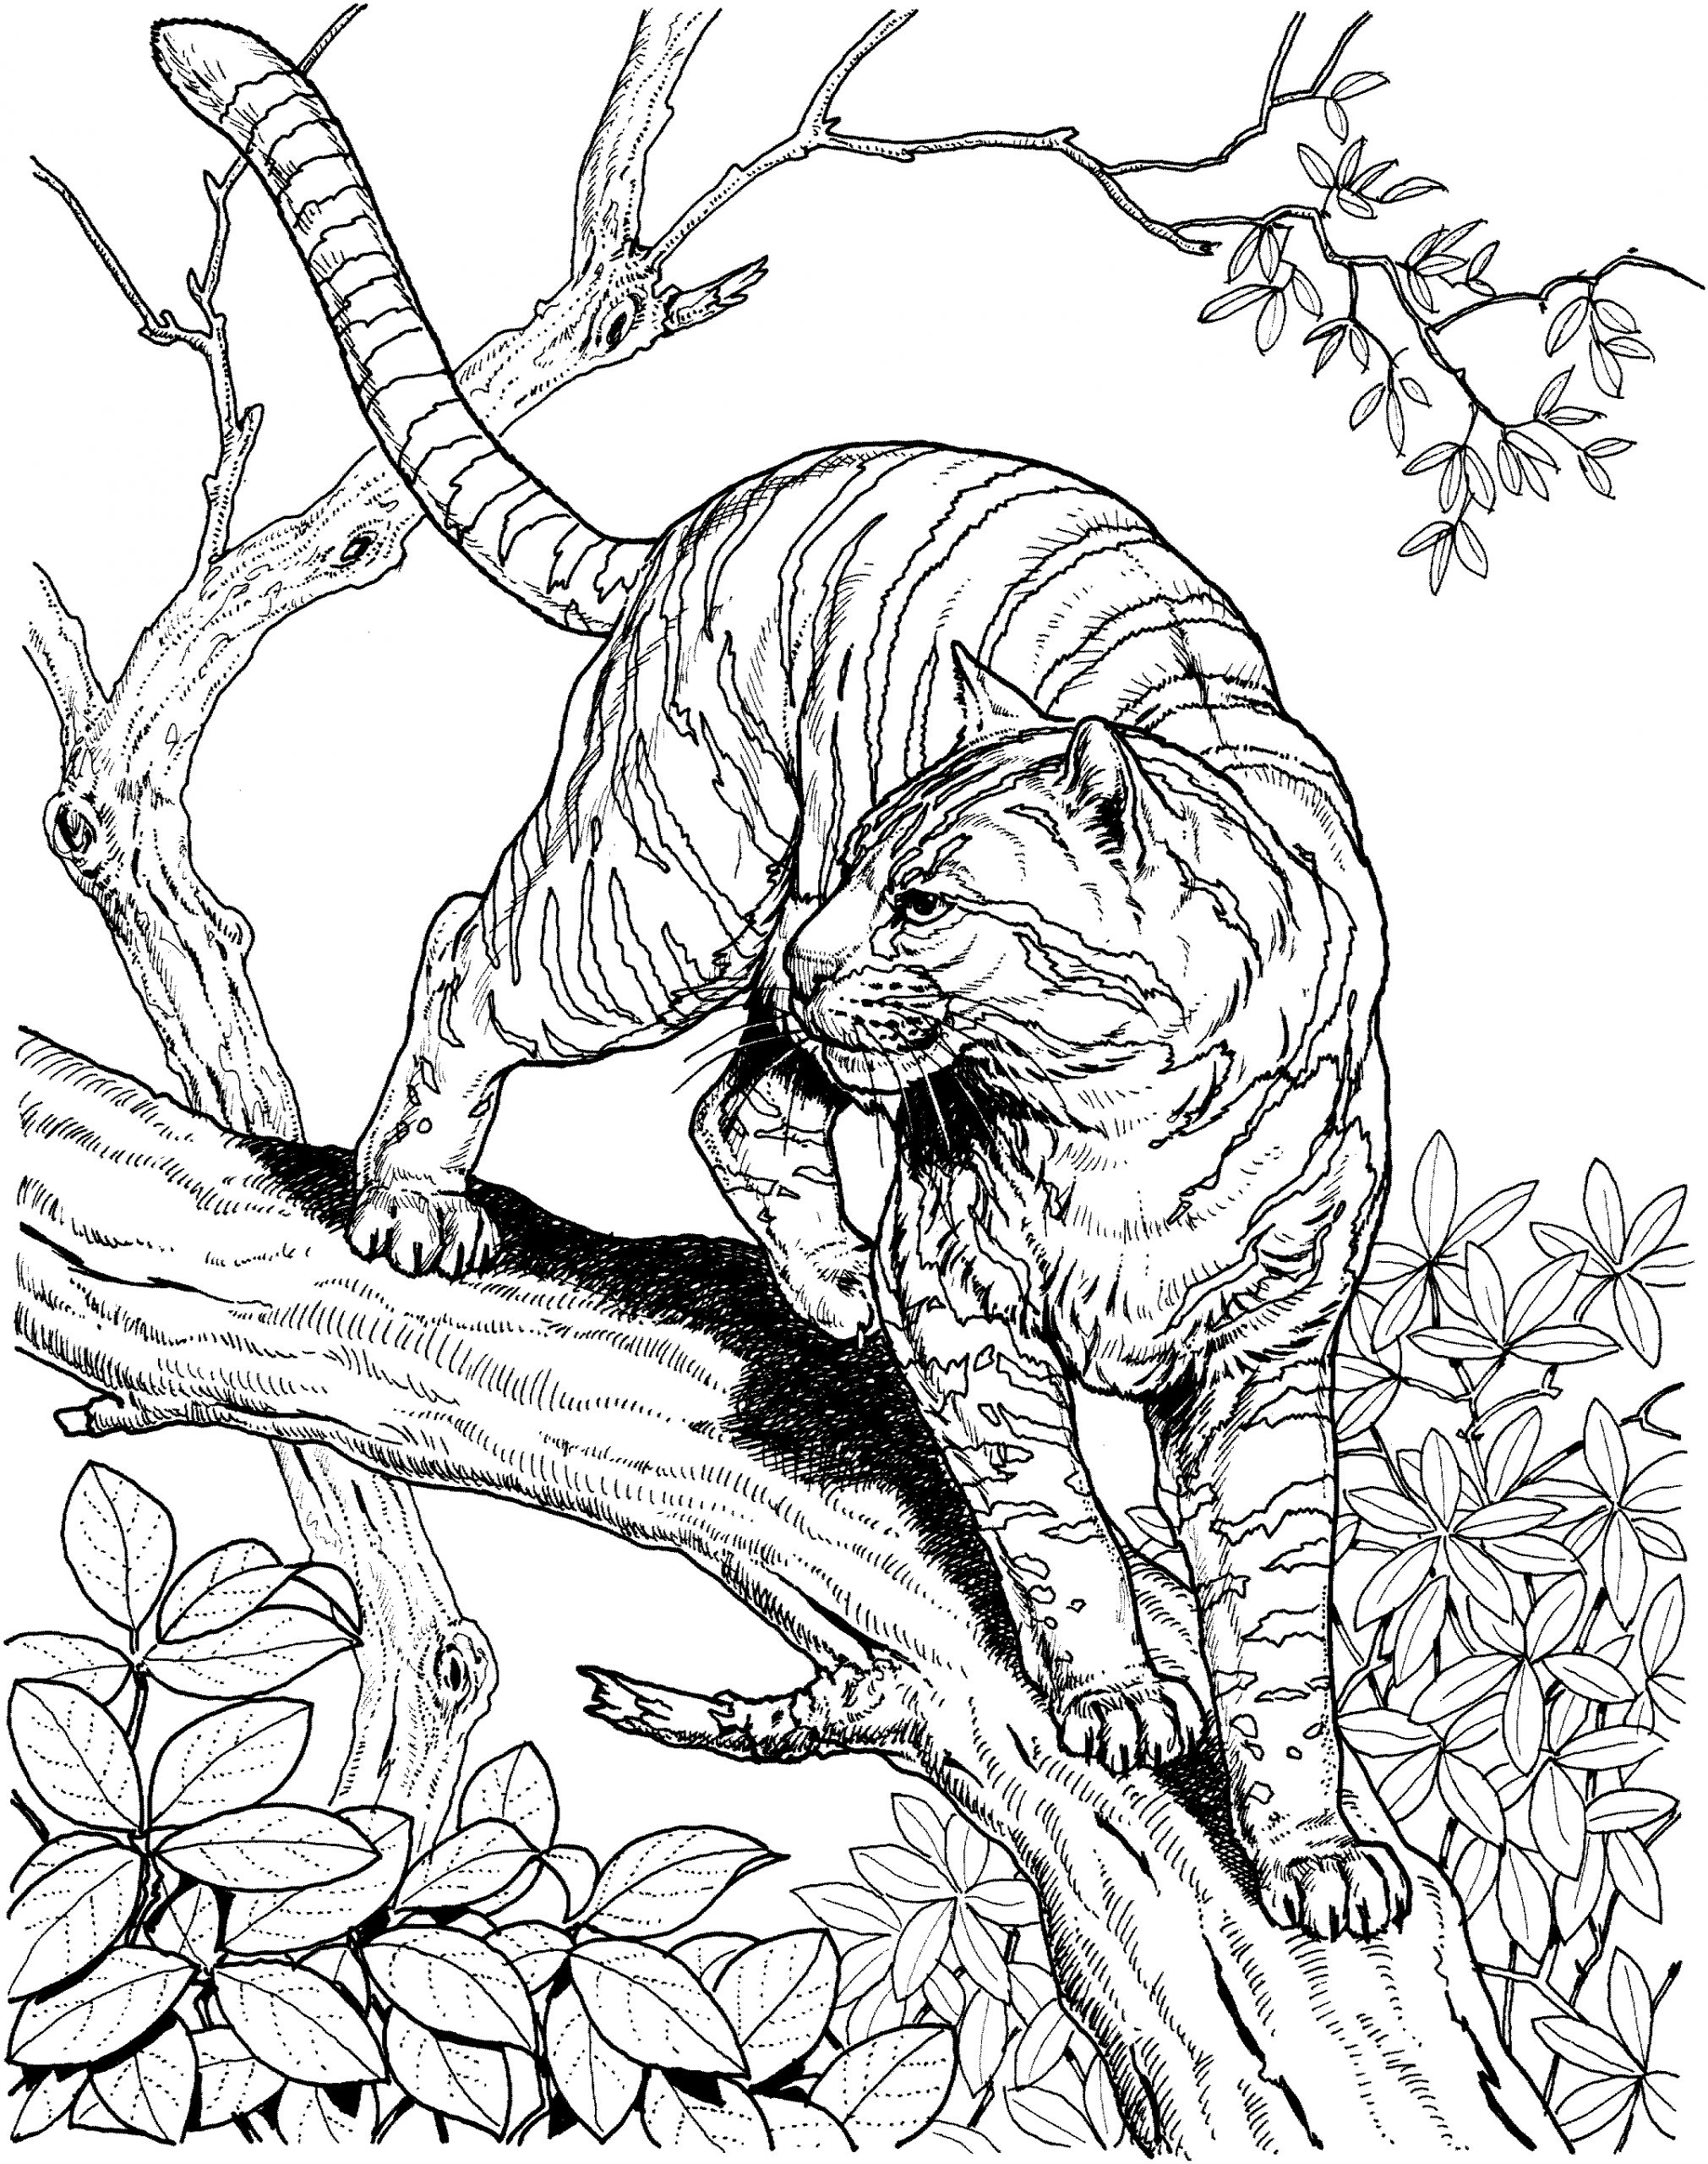 coloring book ~ Detailed Coloring Sheets Photo Inspirations Pages With Lots  Of Detail For Kids To Print Animal Free 86 Detailed Coloring Sheets Photo  Inspirations. Very Detailed Coloring Sheets For Kids. Detailed